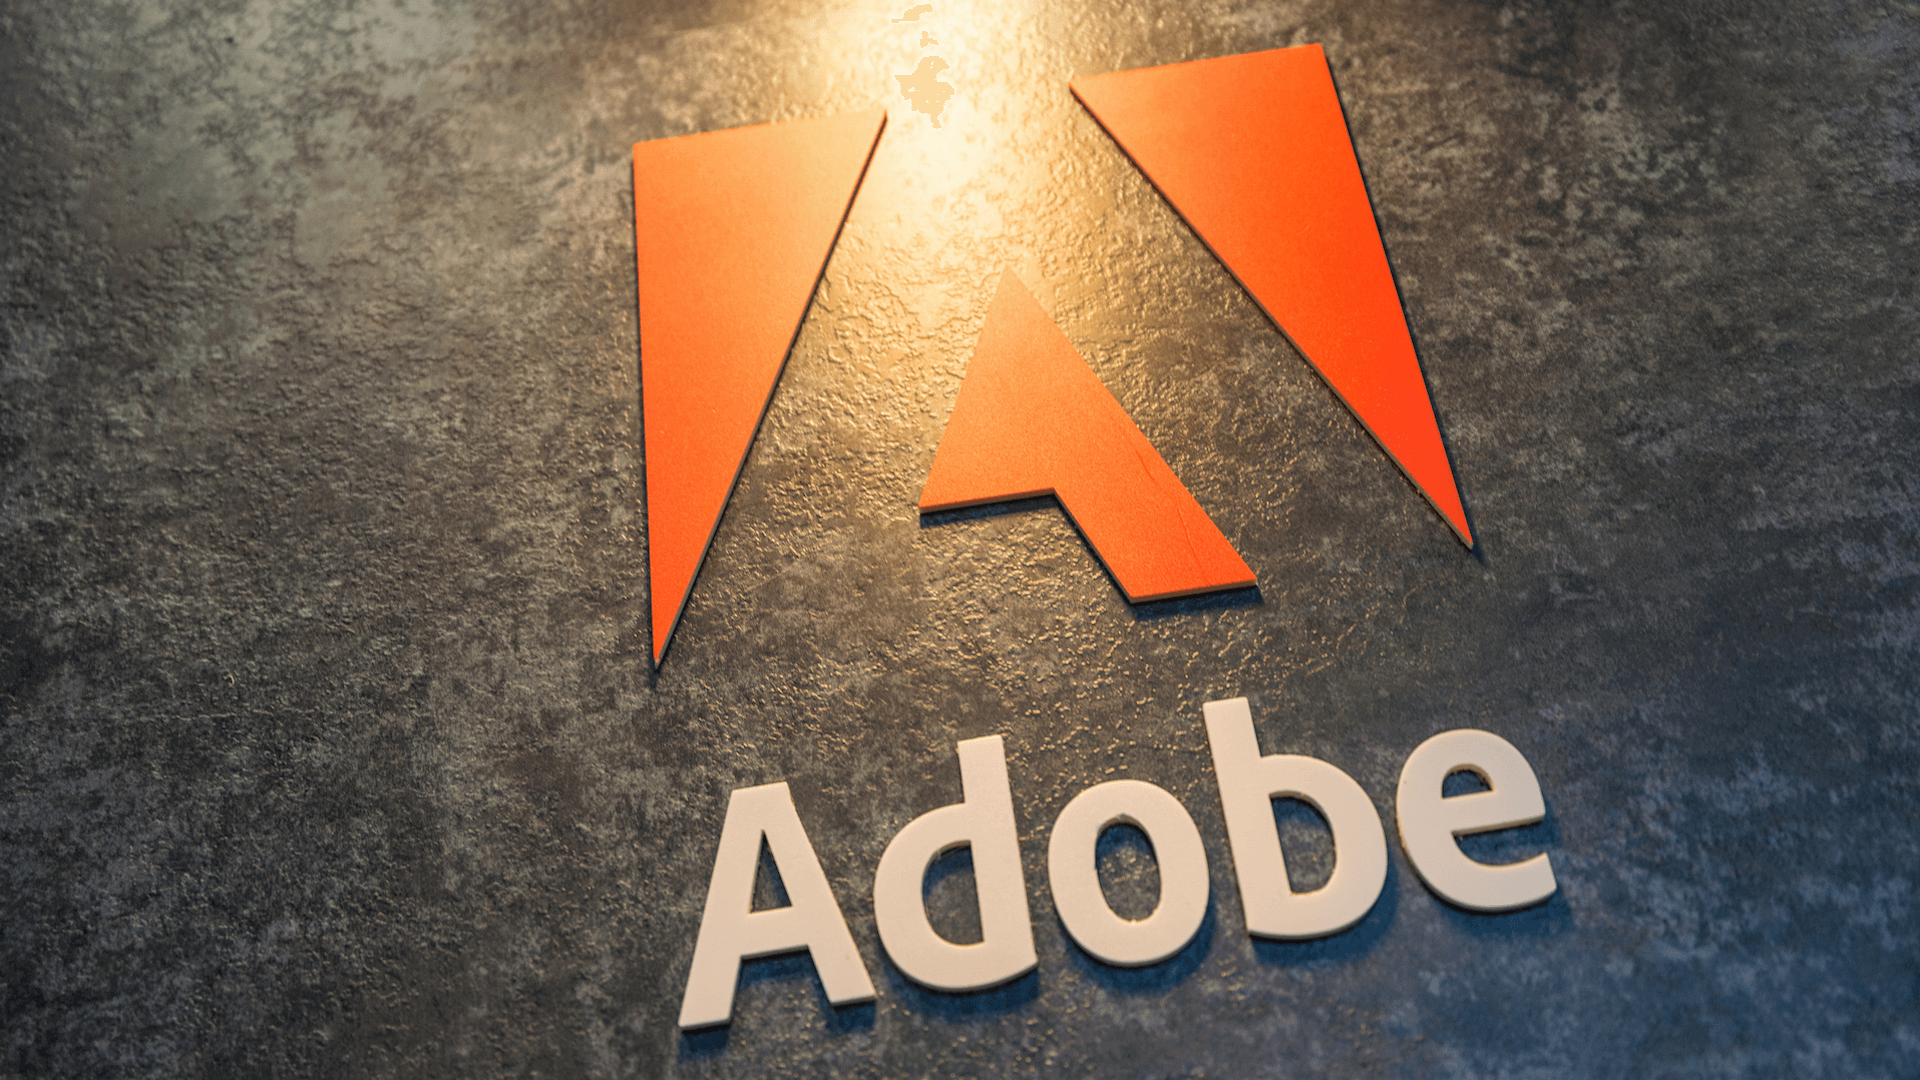 Adobe adds Customer Journey Analytics, designed to be accessible to all marketers